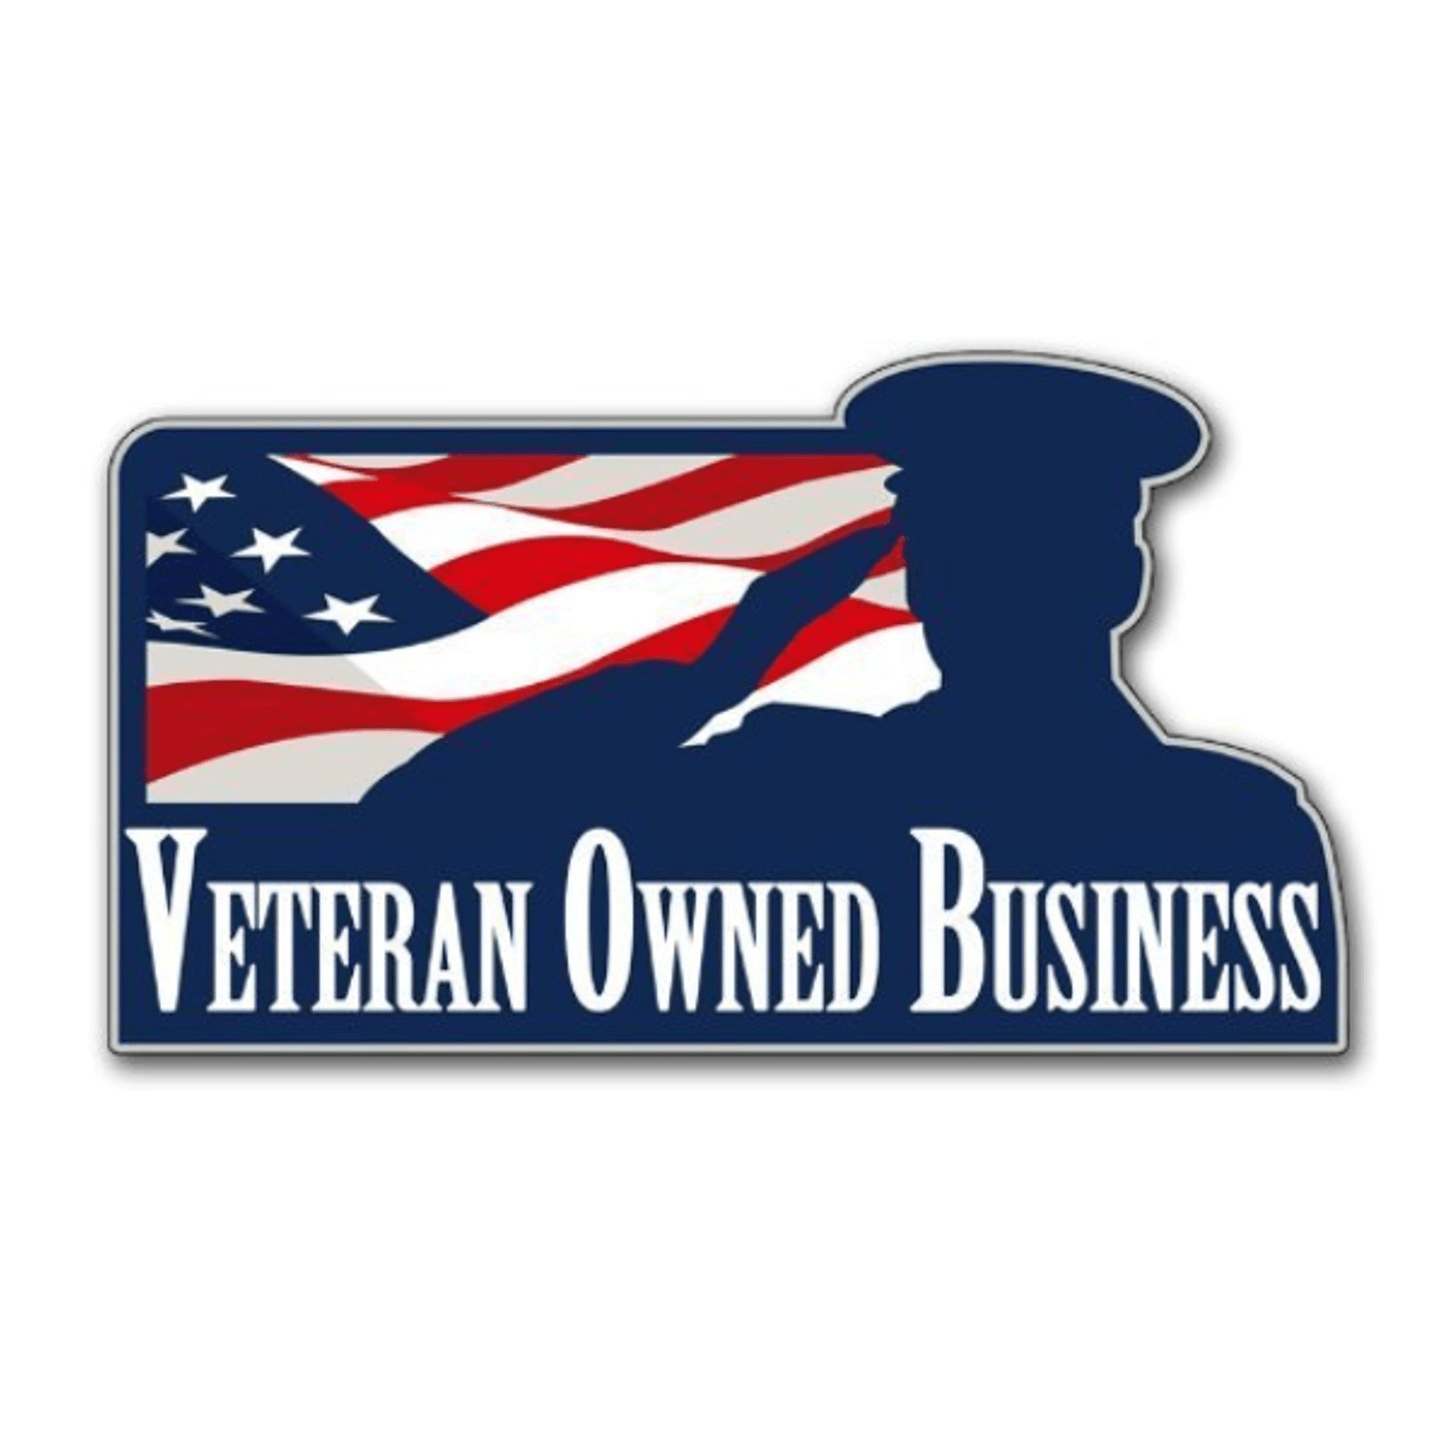 Proud to Be A Veteran Owned Business!